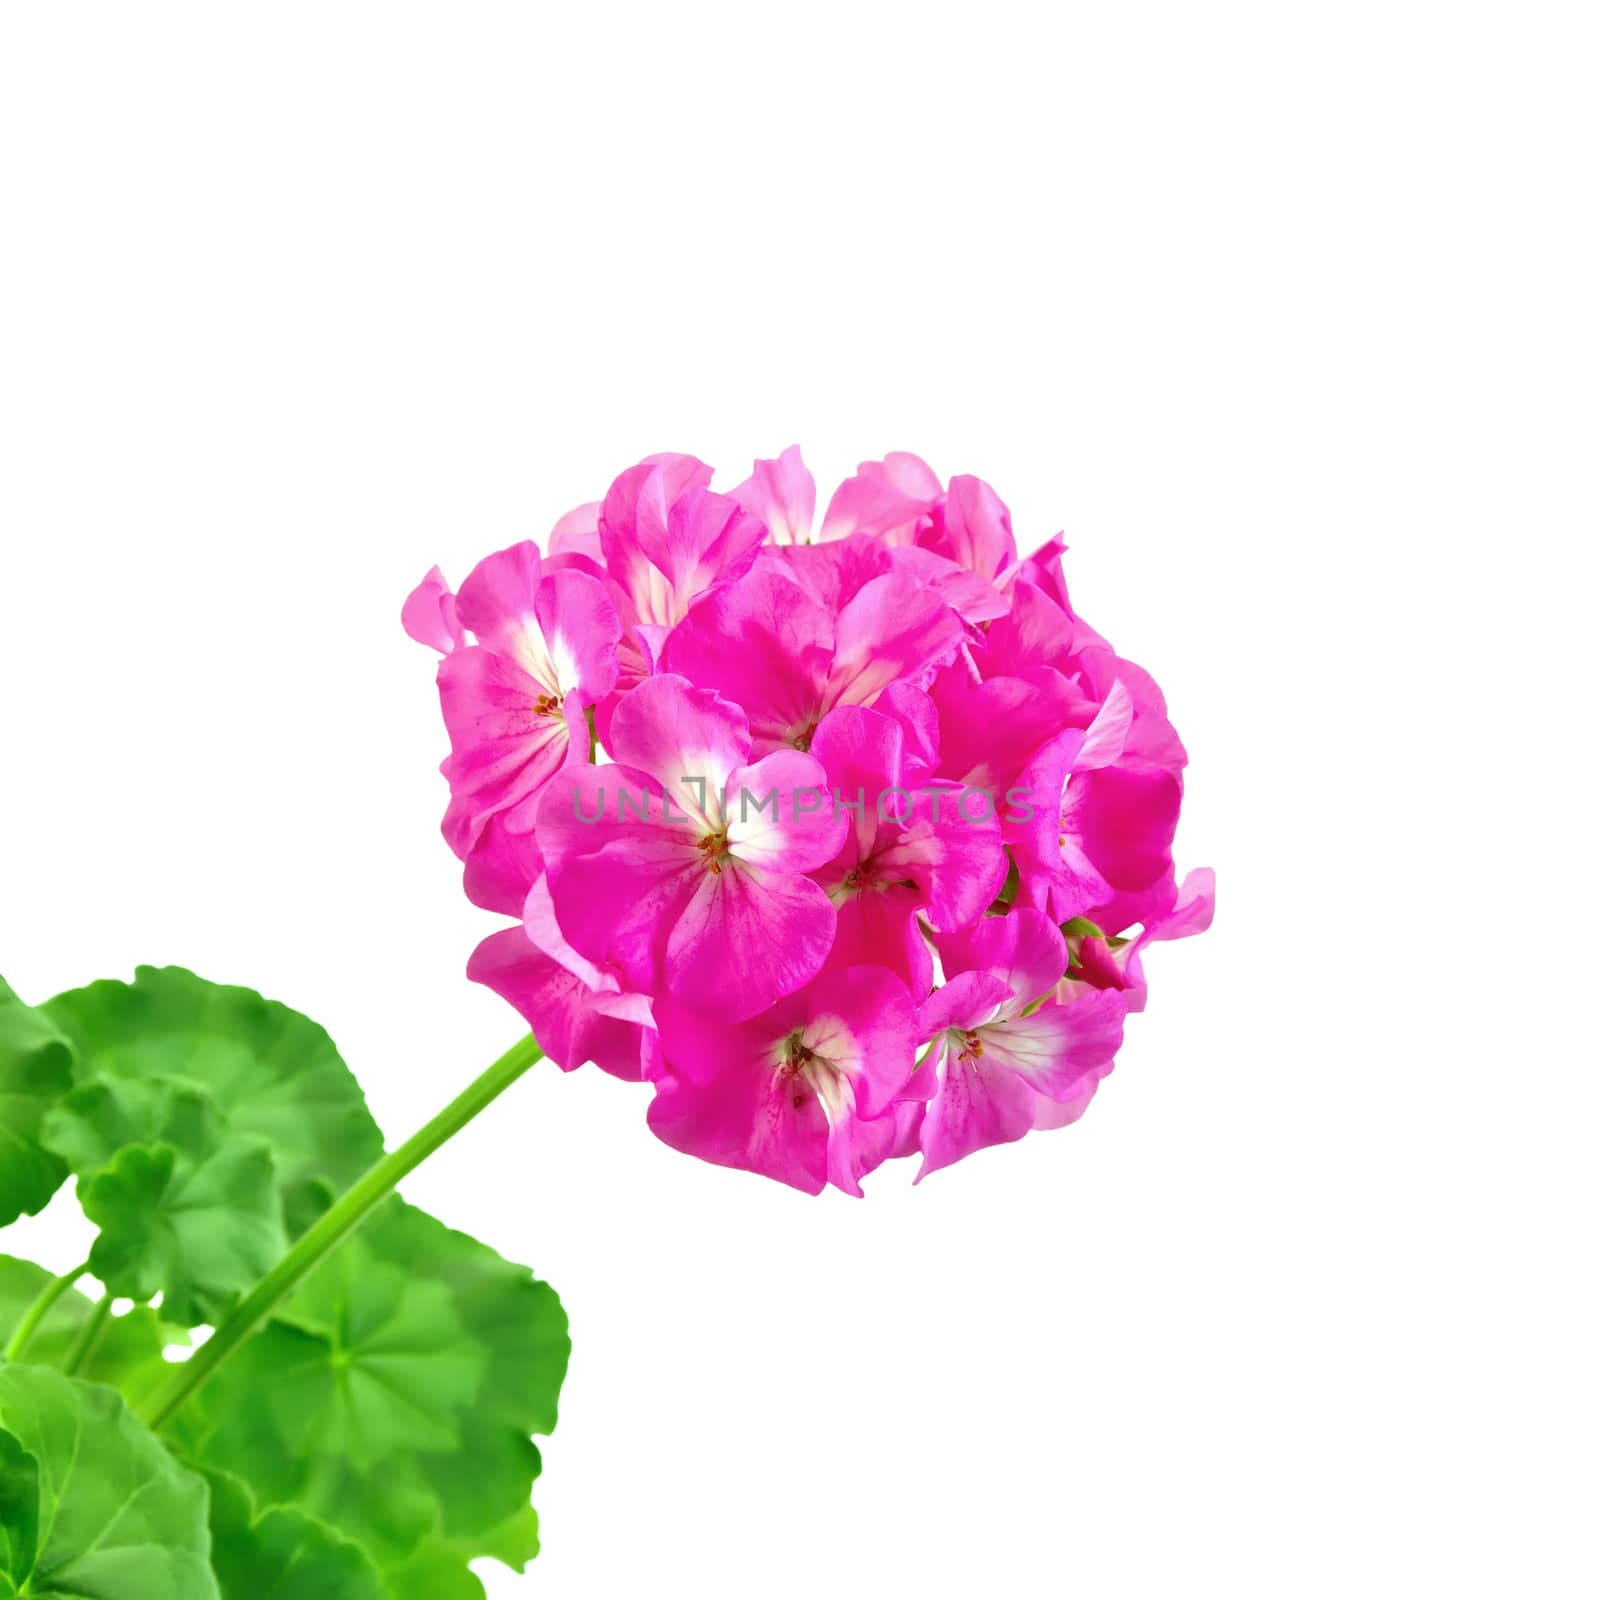 Geranium pink with leaves by rezkrr